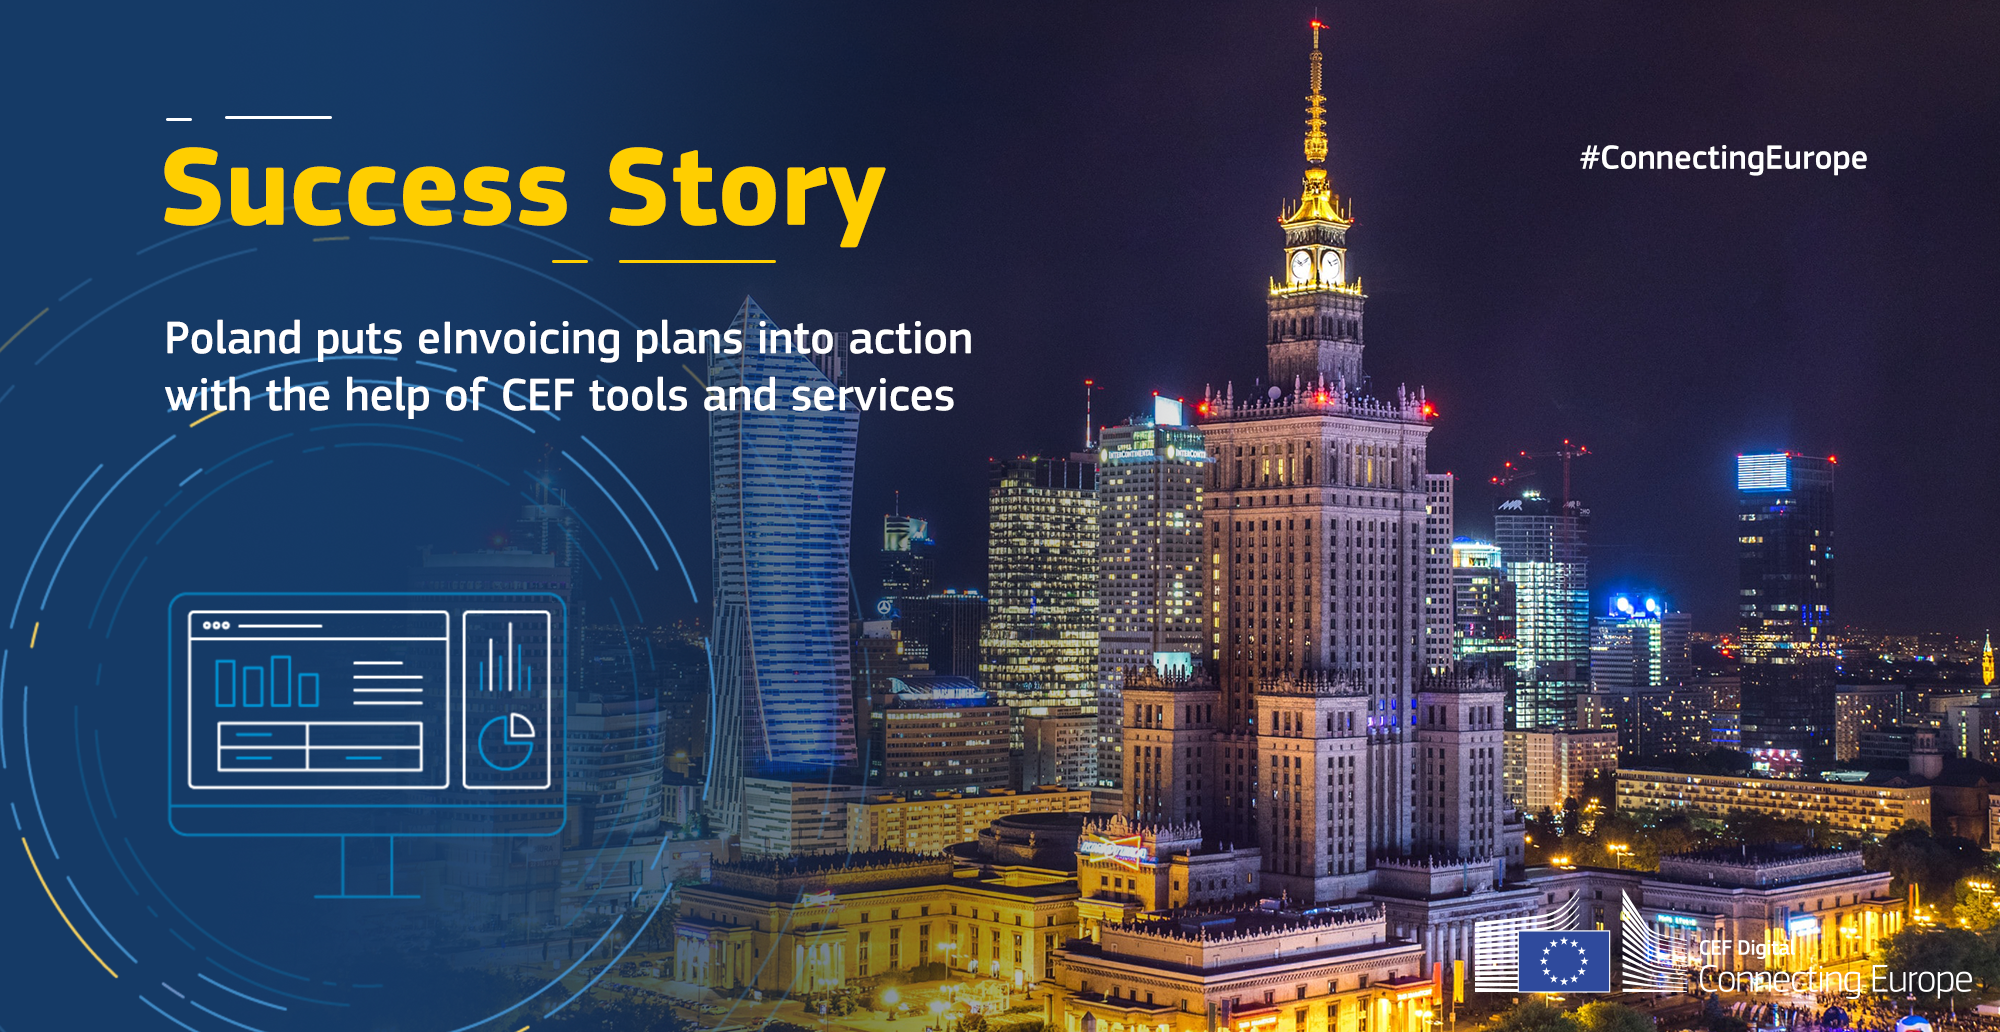 Title of the success story against a background of the Palace of culture in Warsaw lit up at night